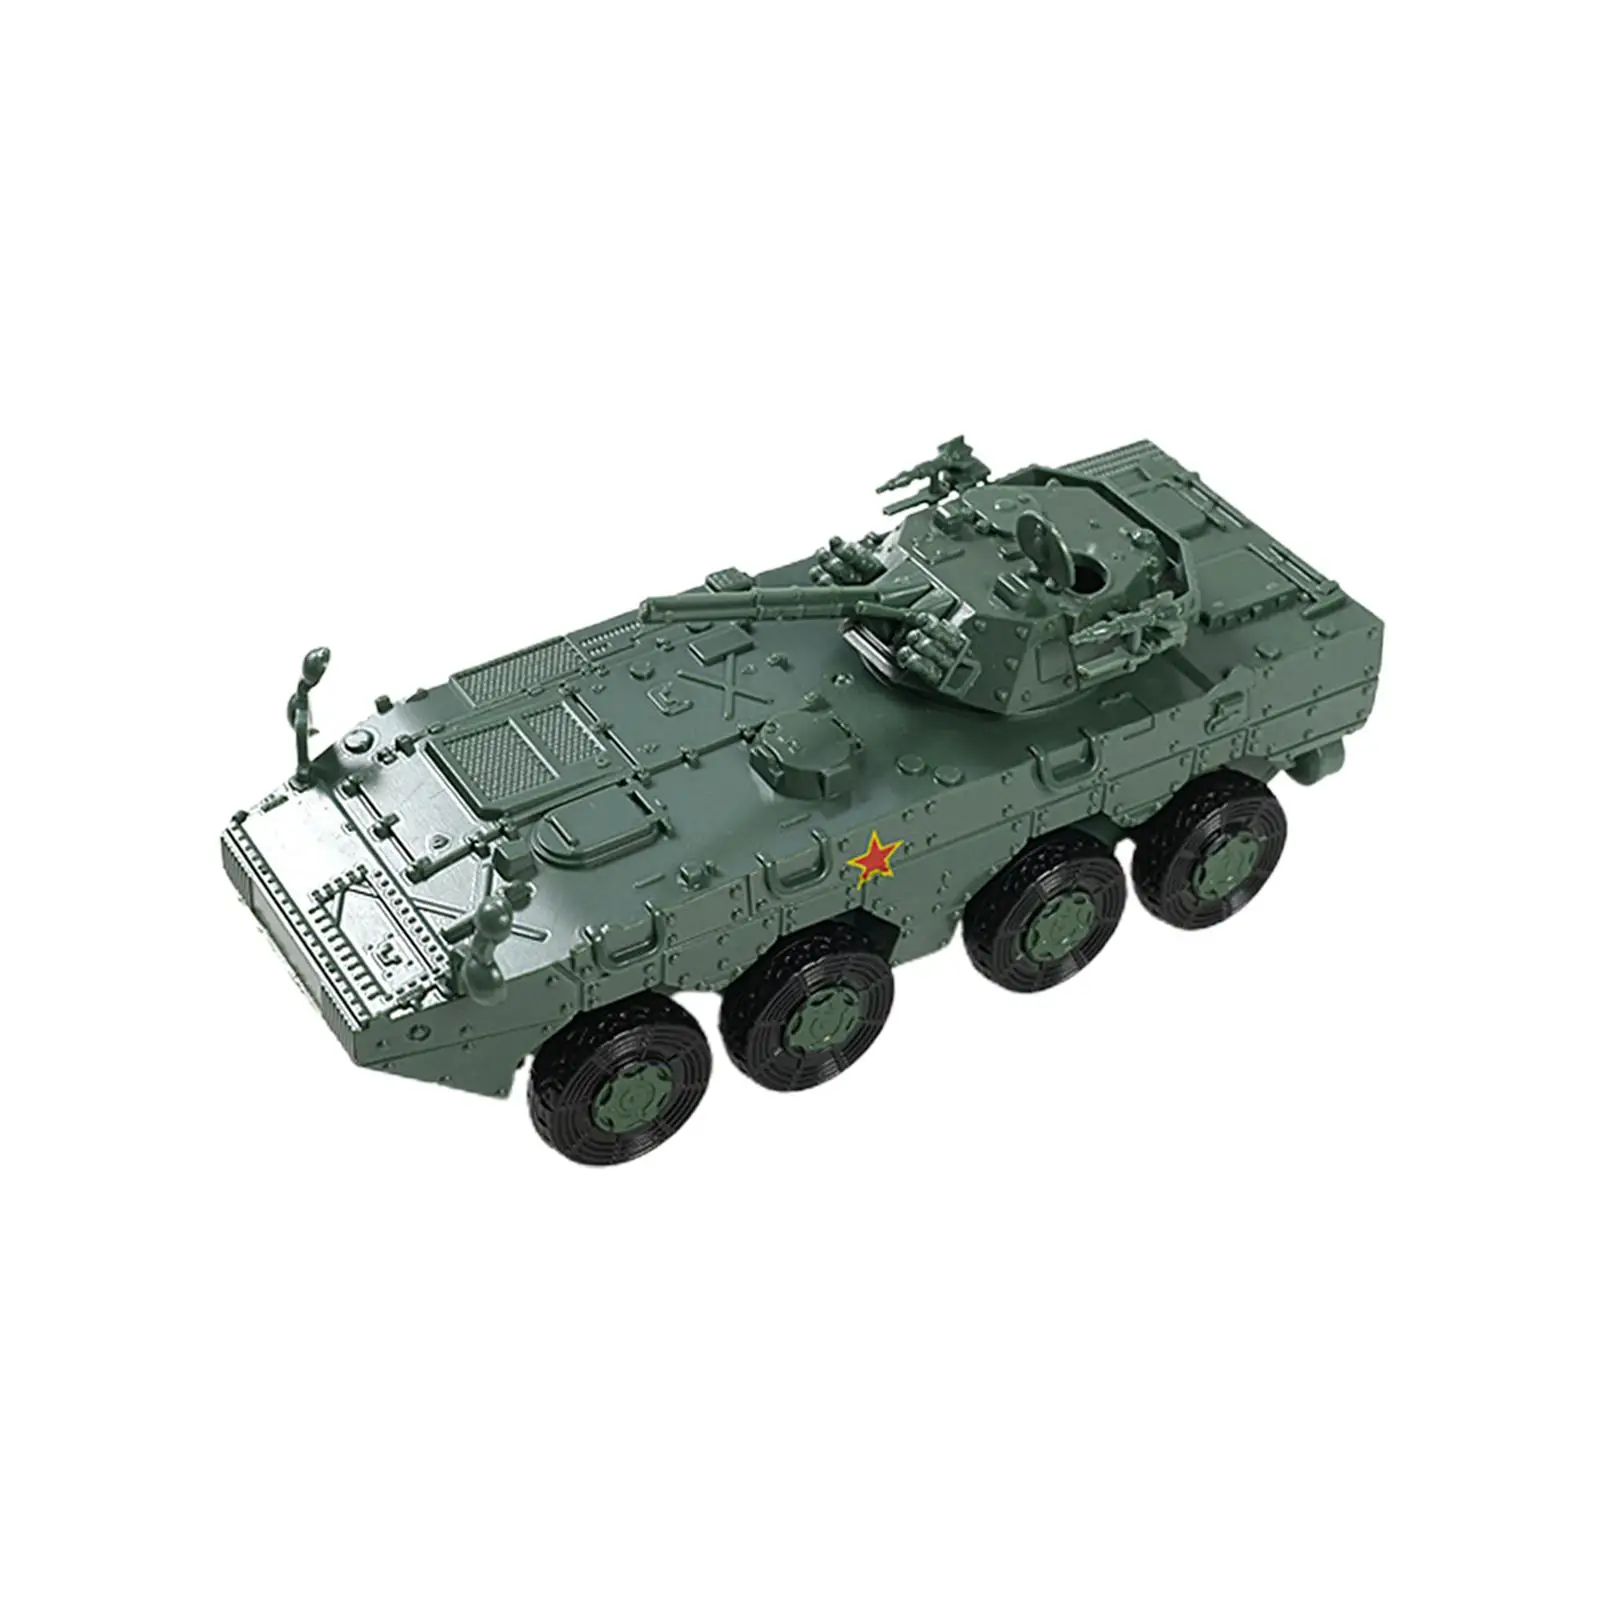 1/72 4D Tank Model Crafts Building Model Kits Chariot Model for Gift Party Favors Collectibles Tabletop Decor Table Scene